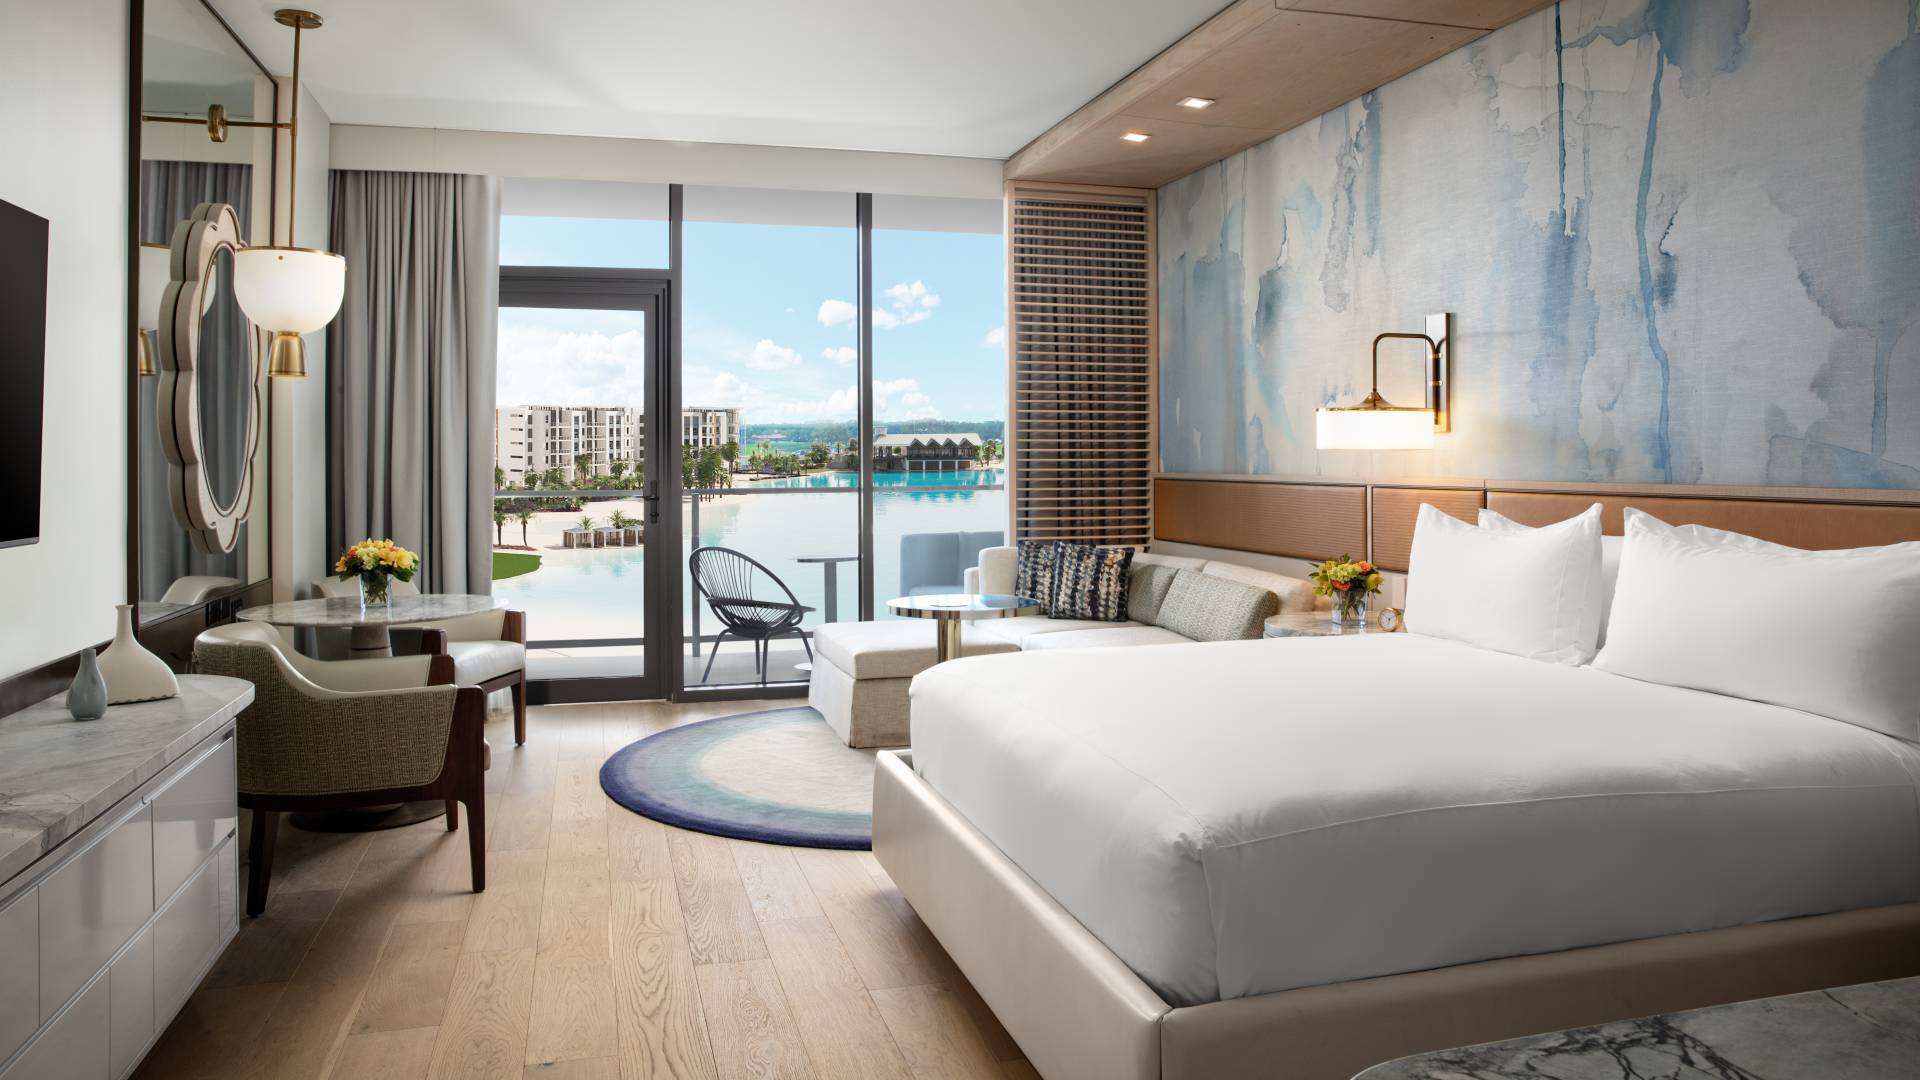 King bedroom with lagoon view